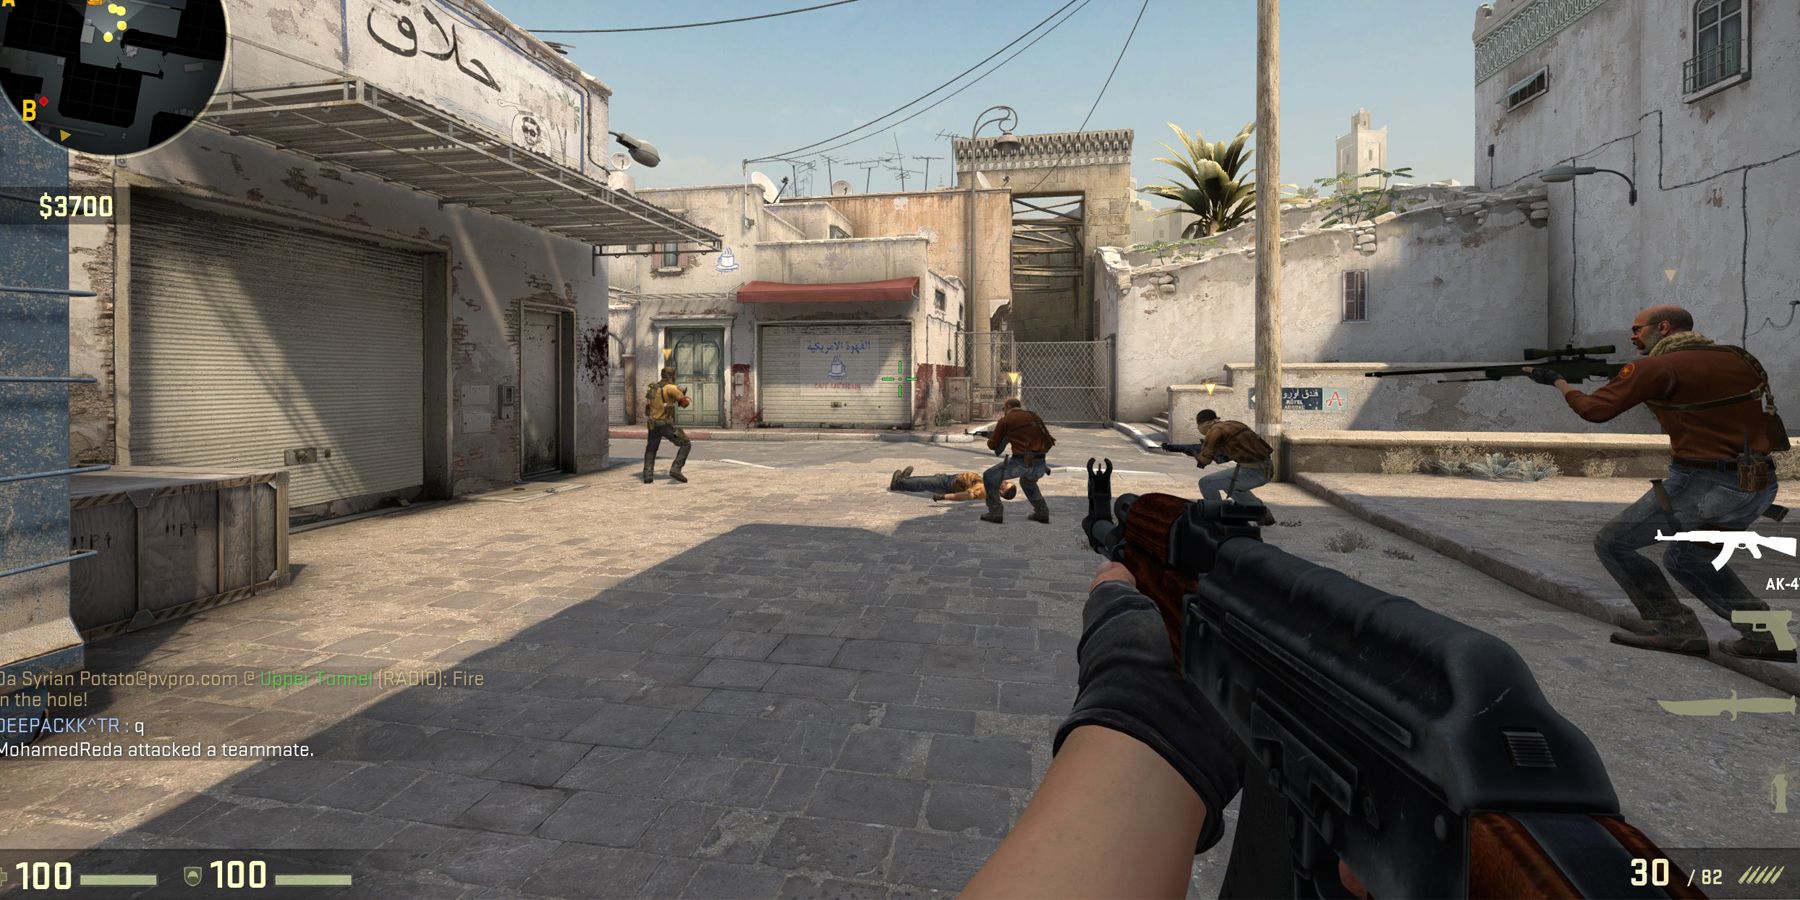 Gameplay in Counter-Strike:Global Offensive